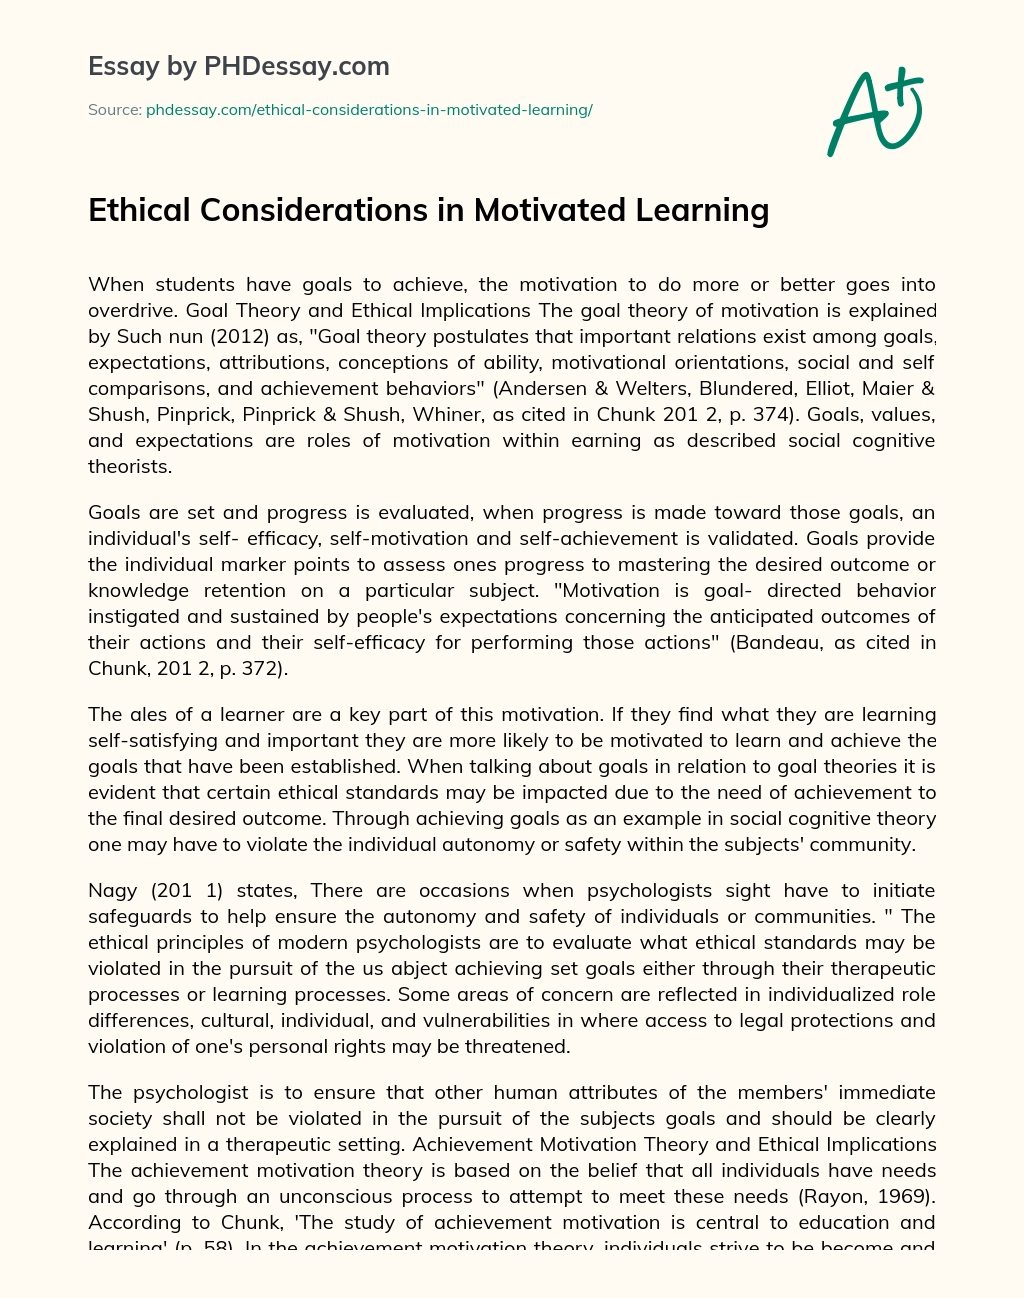 Ethical Considerations in Motivated Learning essay